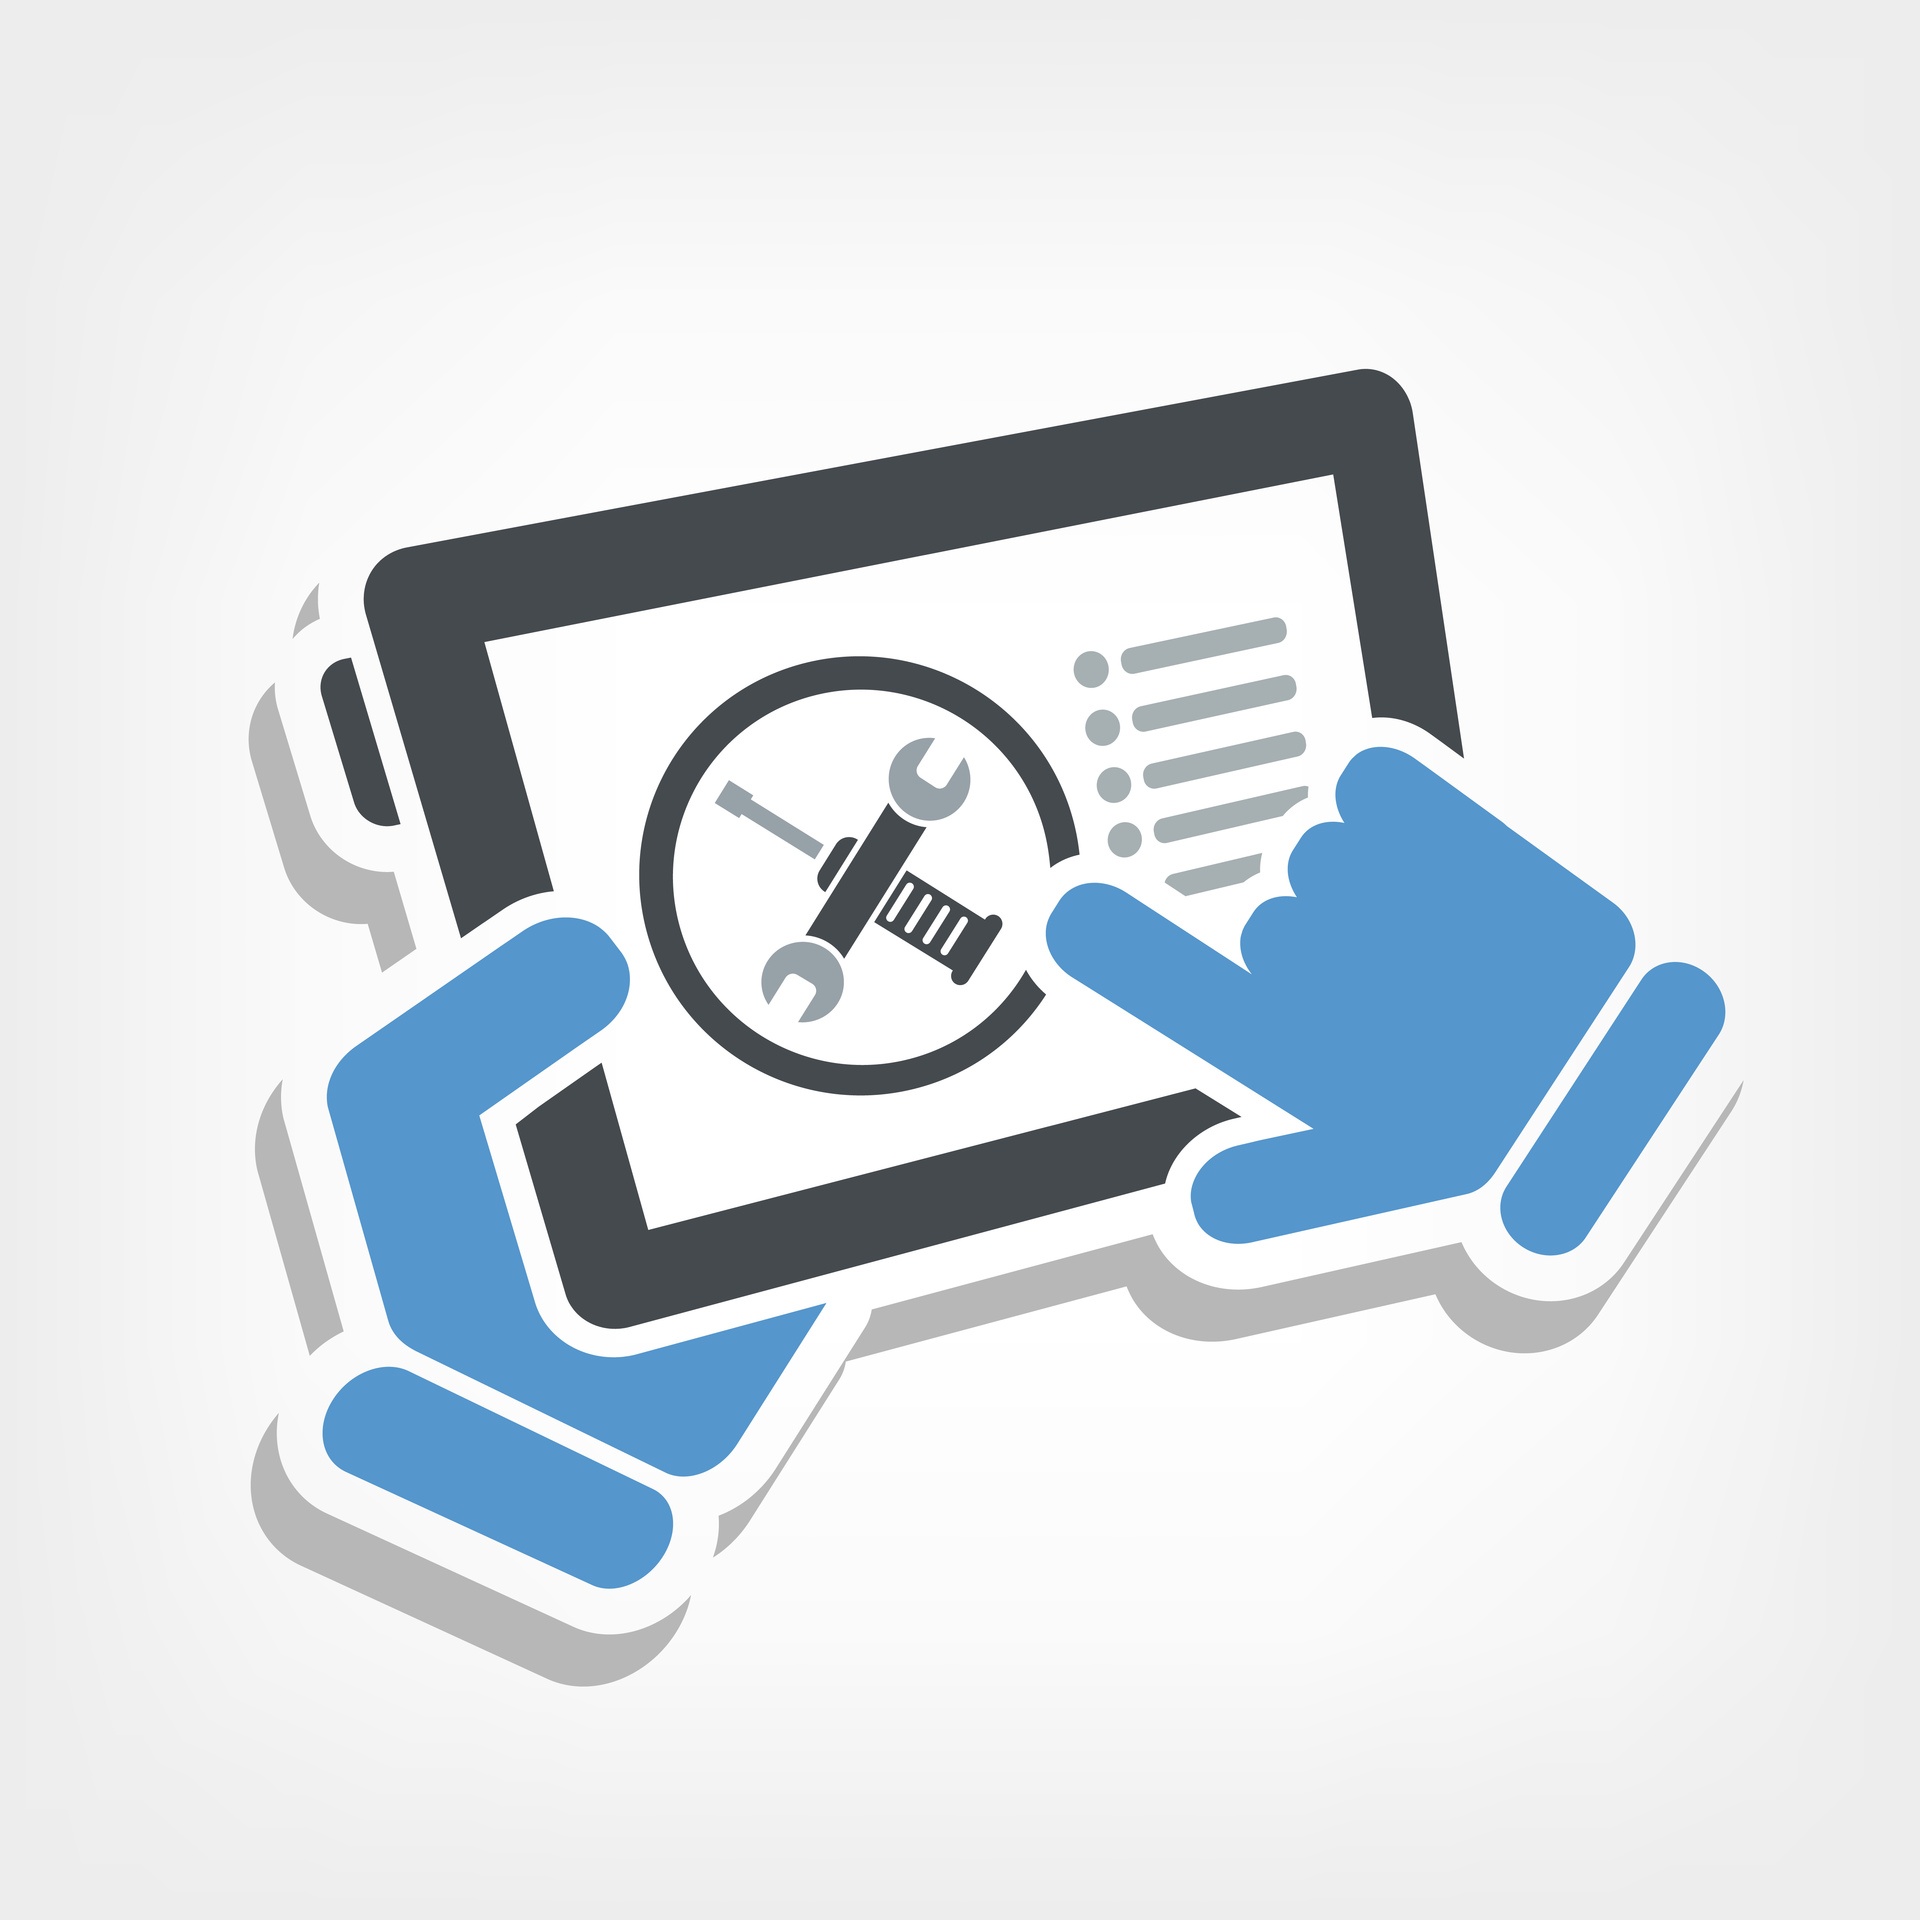 eLearning Maintenance: Save Time With Cloud Publishing!